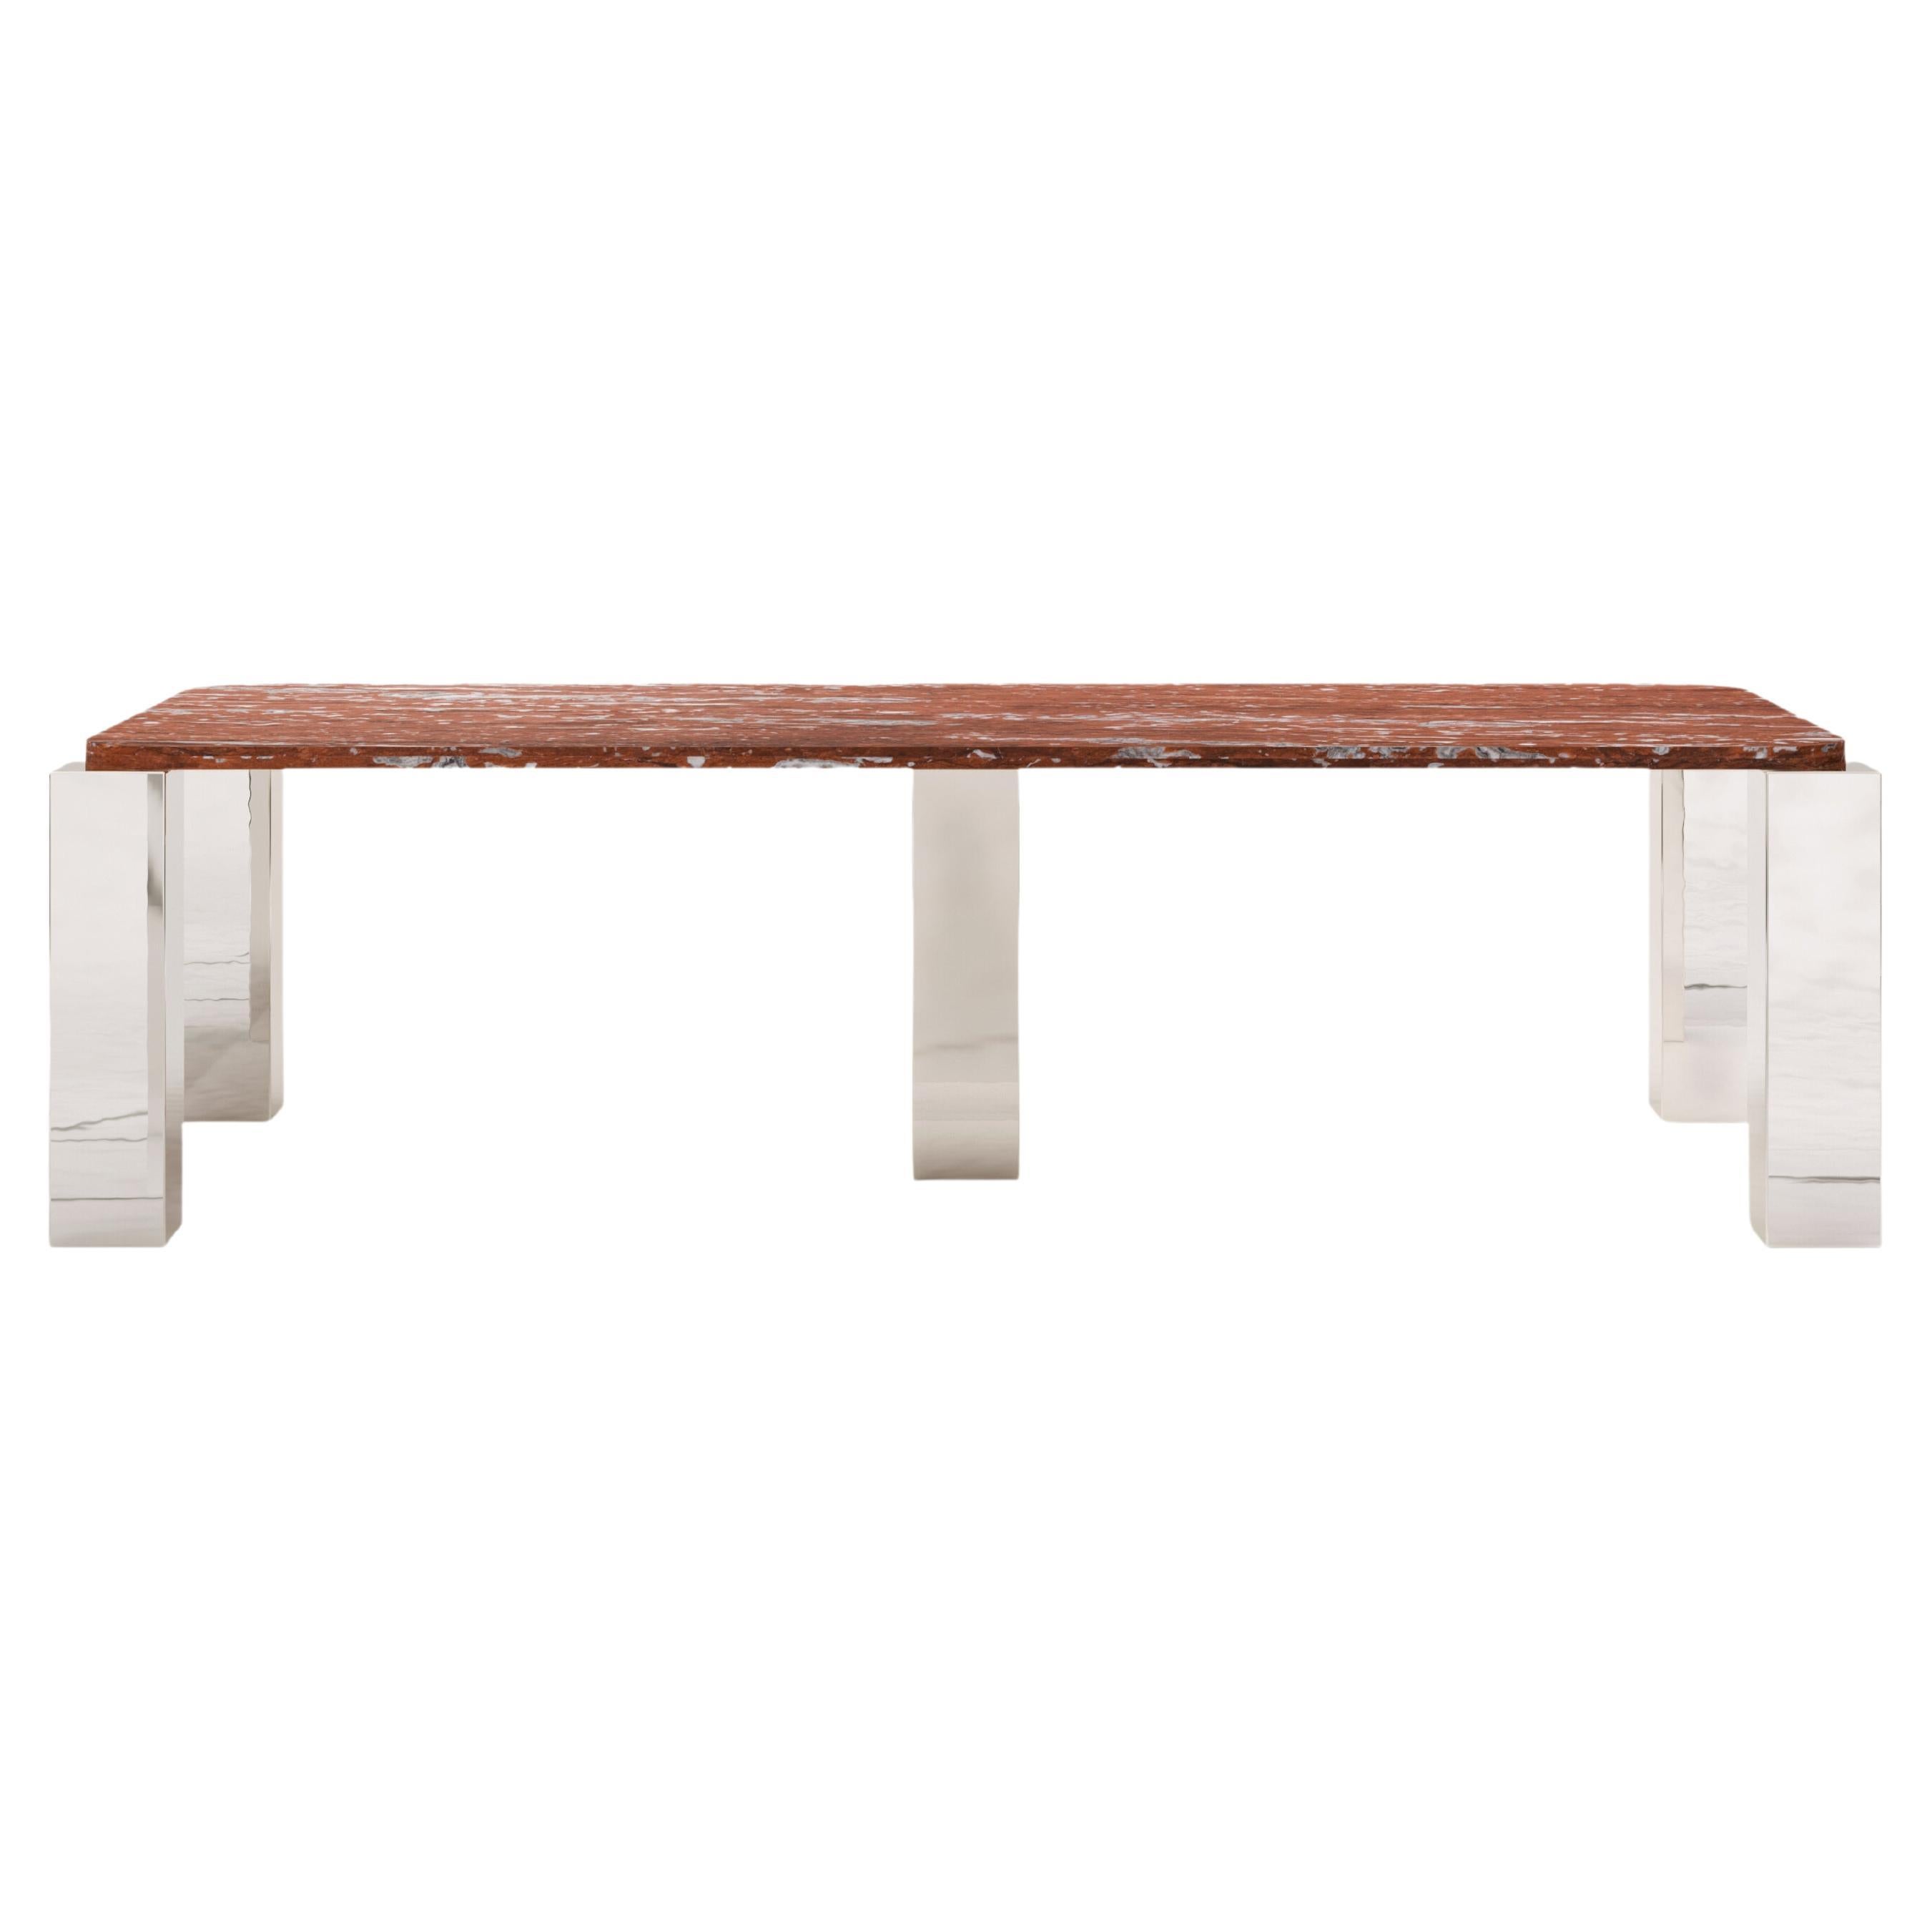 FORM(LA) Cubo Rectangle Dining Table 86”L x 44”W x 30”H Francia Marble & Chrome For Sale